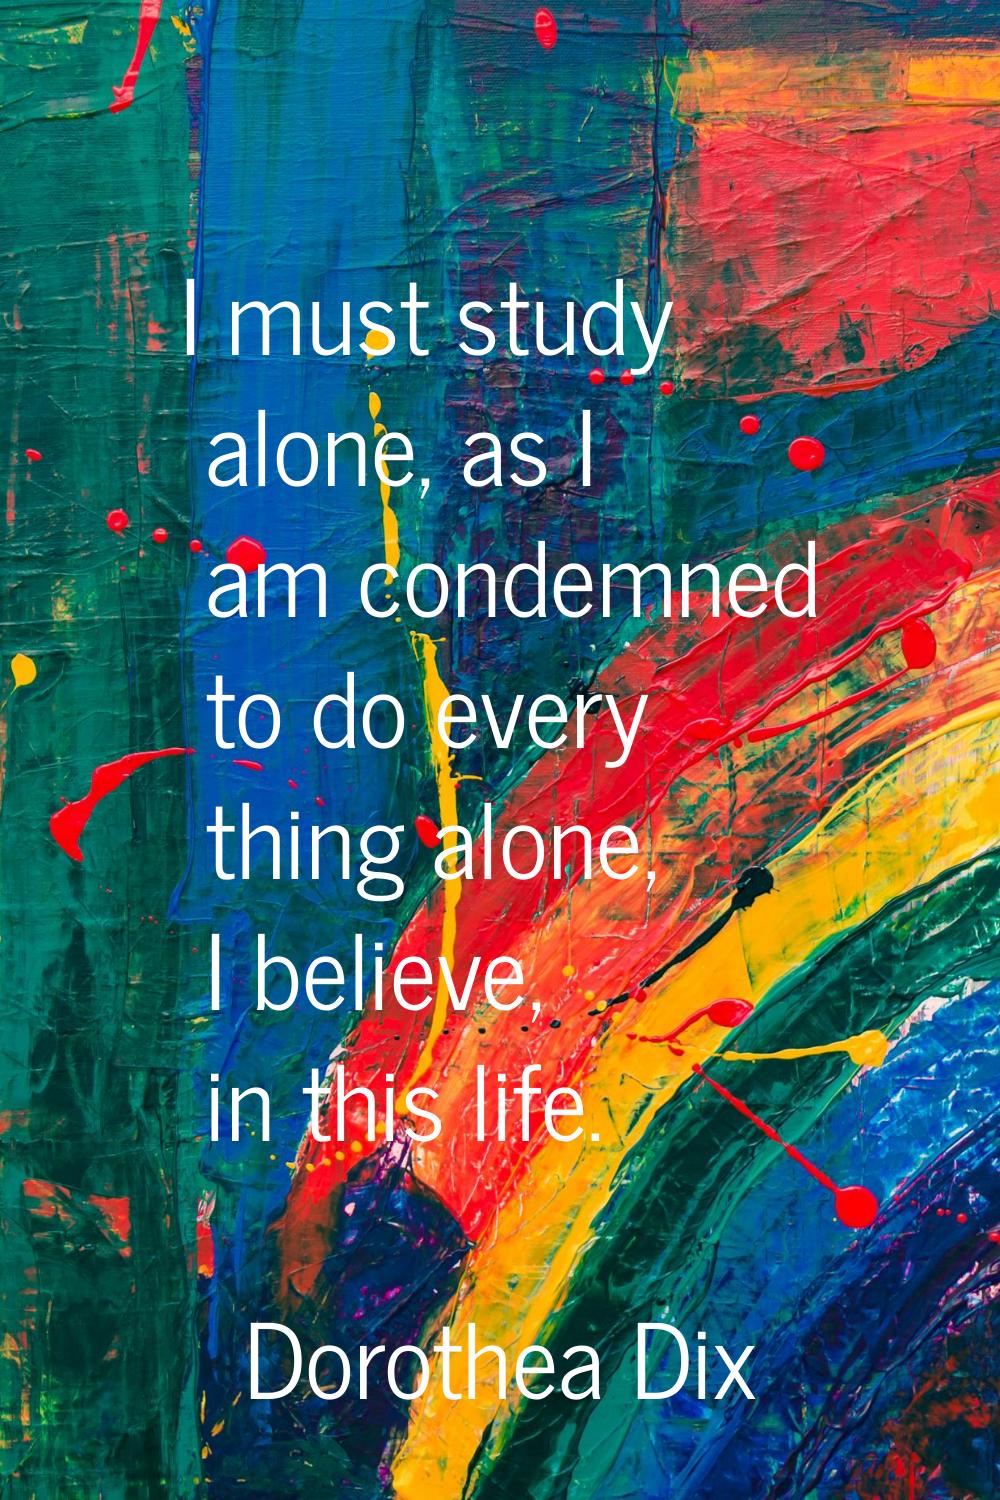 I must study alone, as I am condemned to do every thing alone, I believe, in this life.